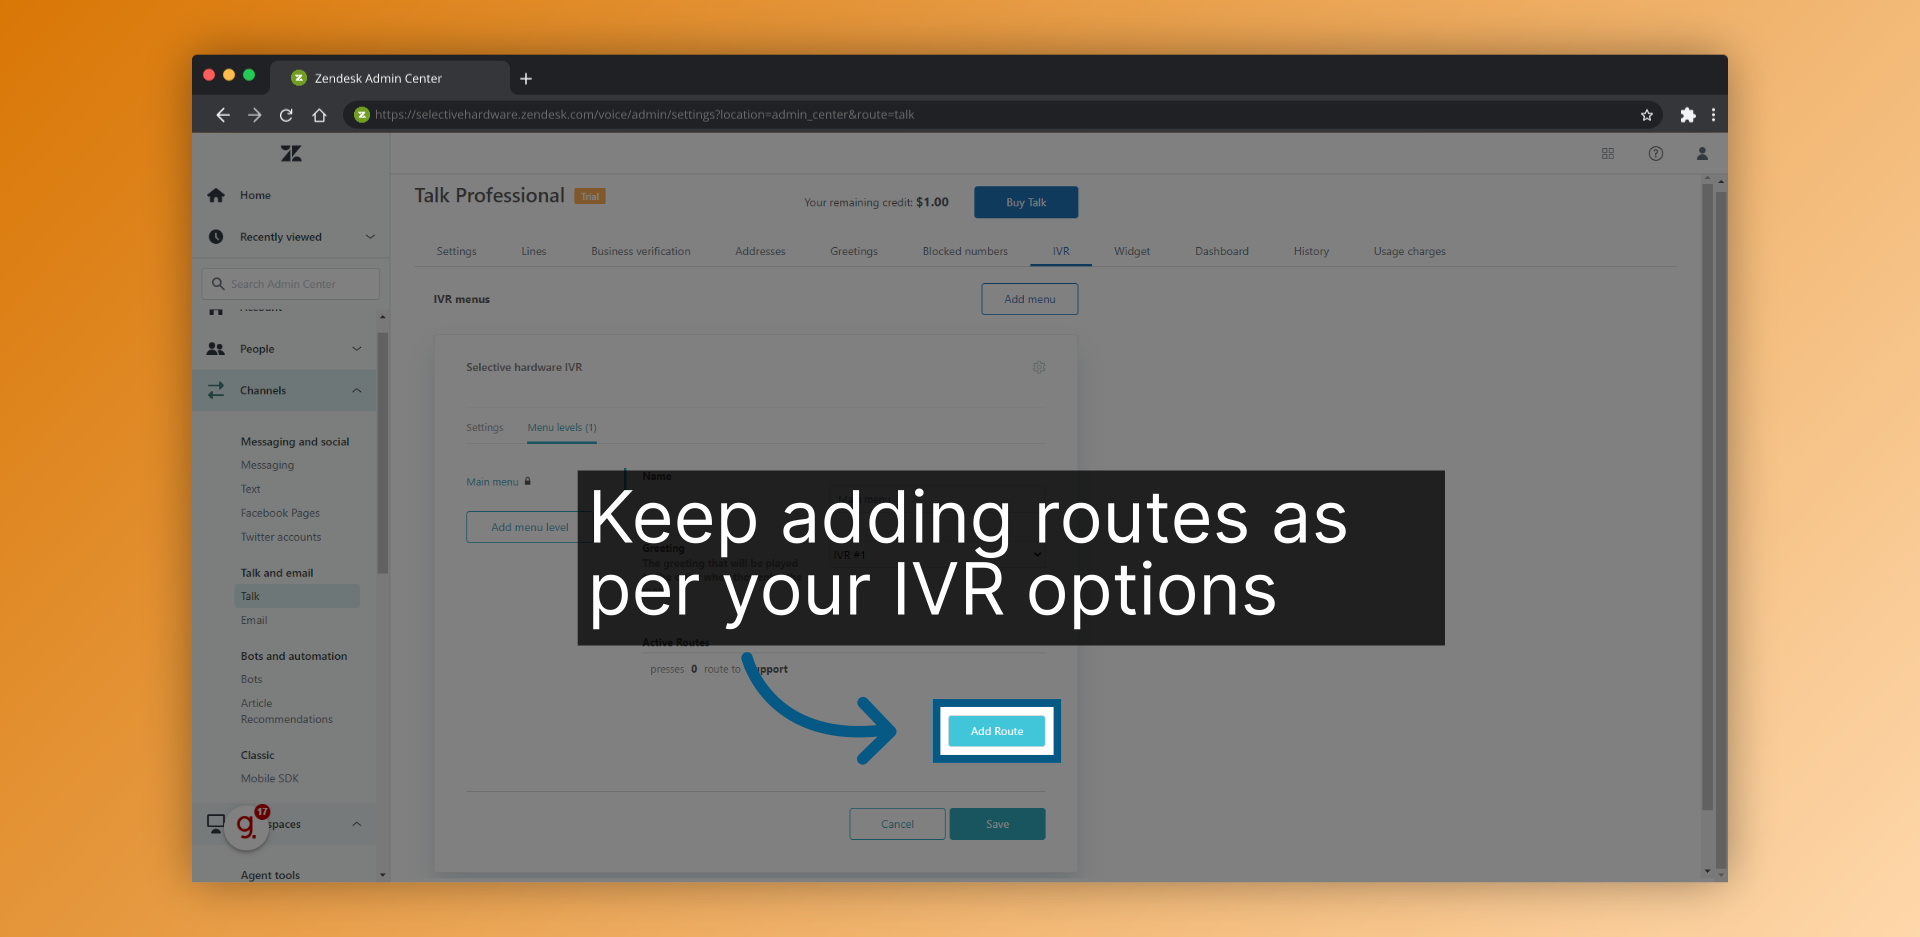 Keep adding routes as per your IVR options